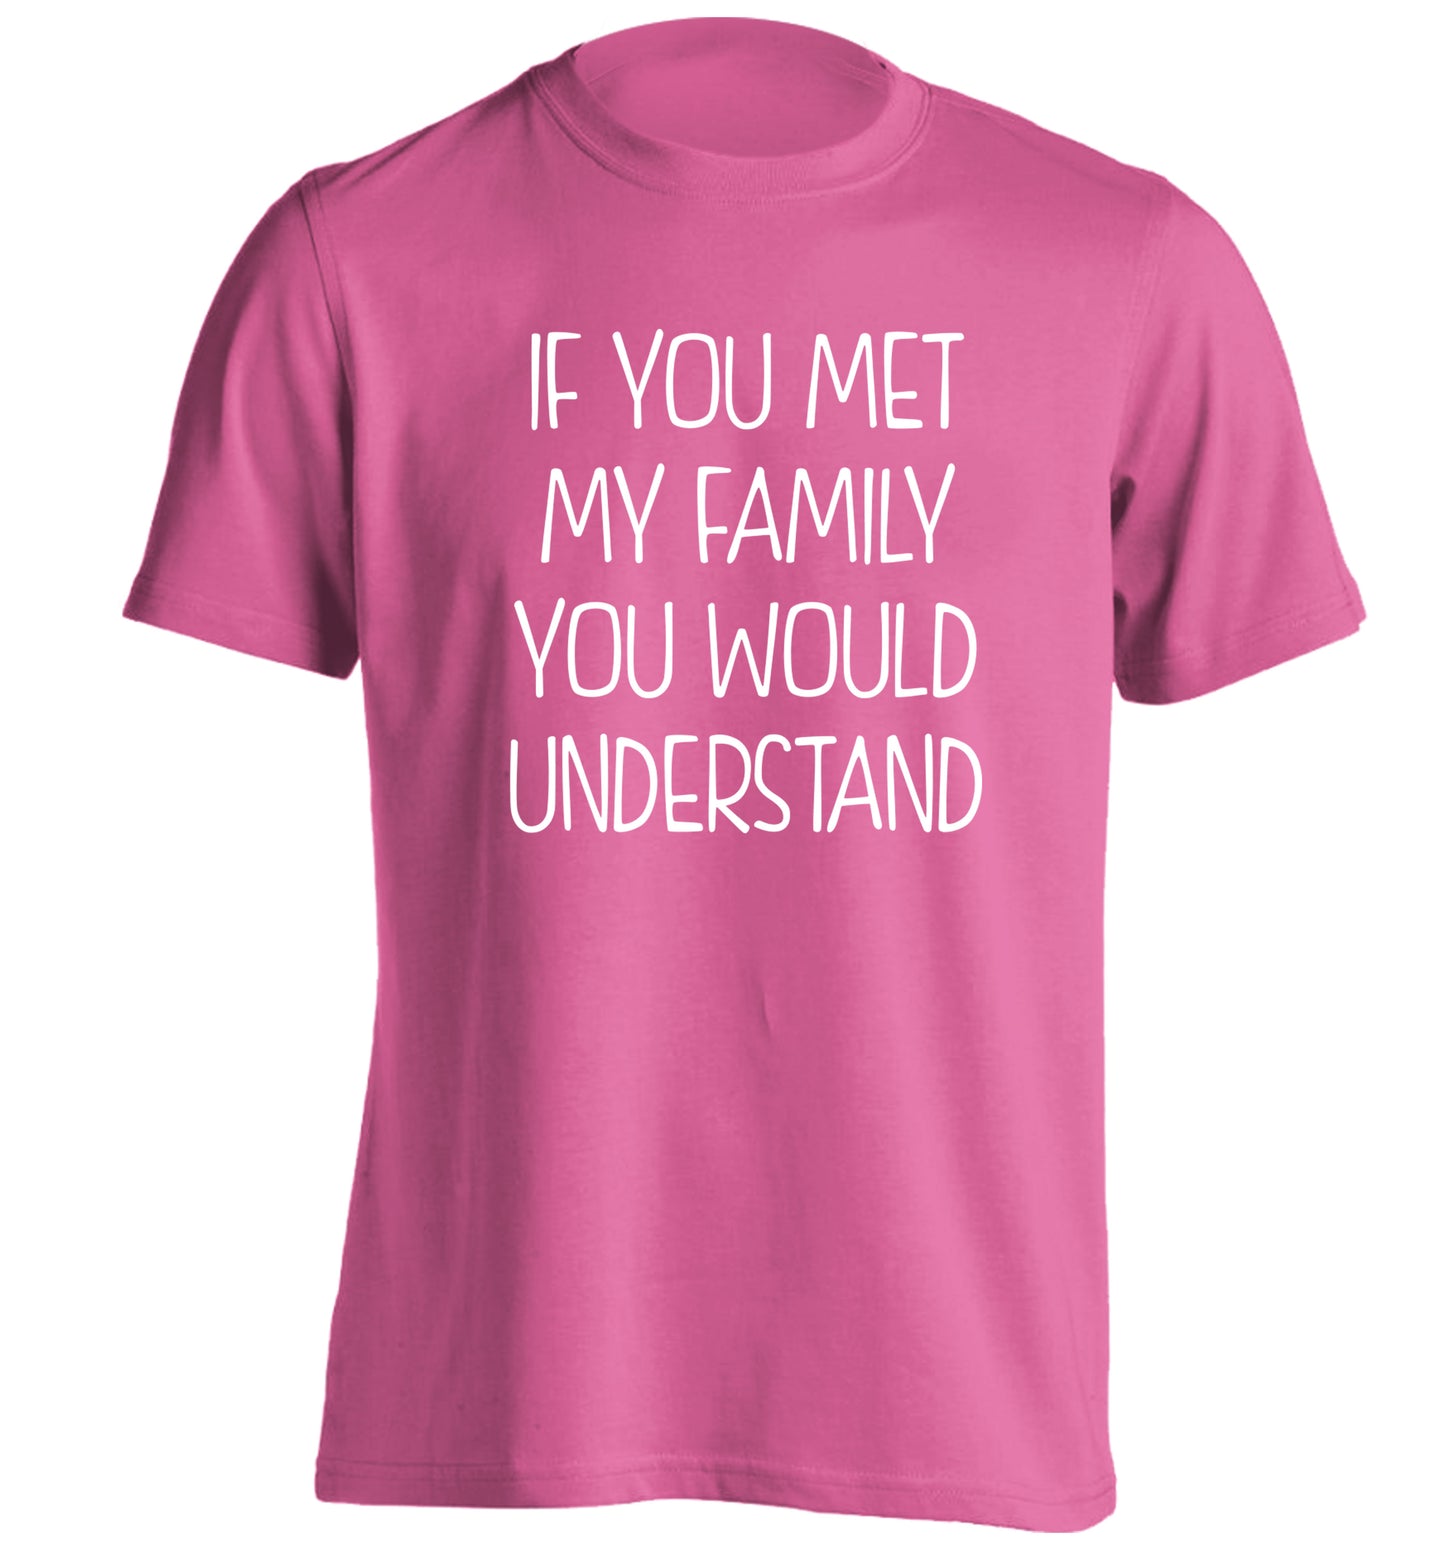 If you met my family you would understand adults unisex pink Tshirt 2XL